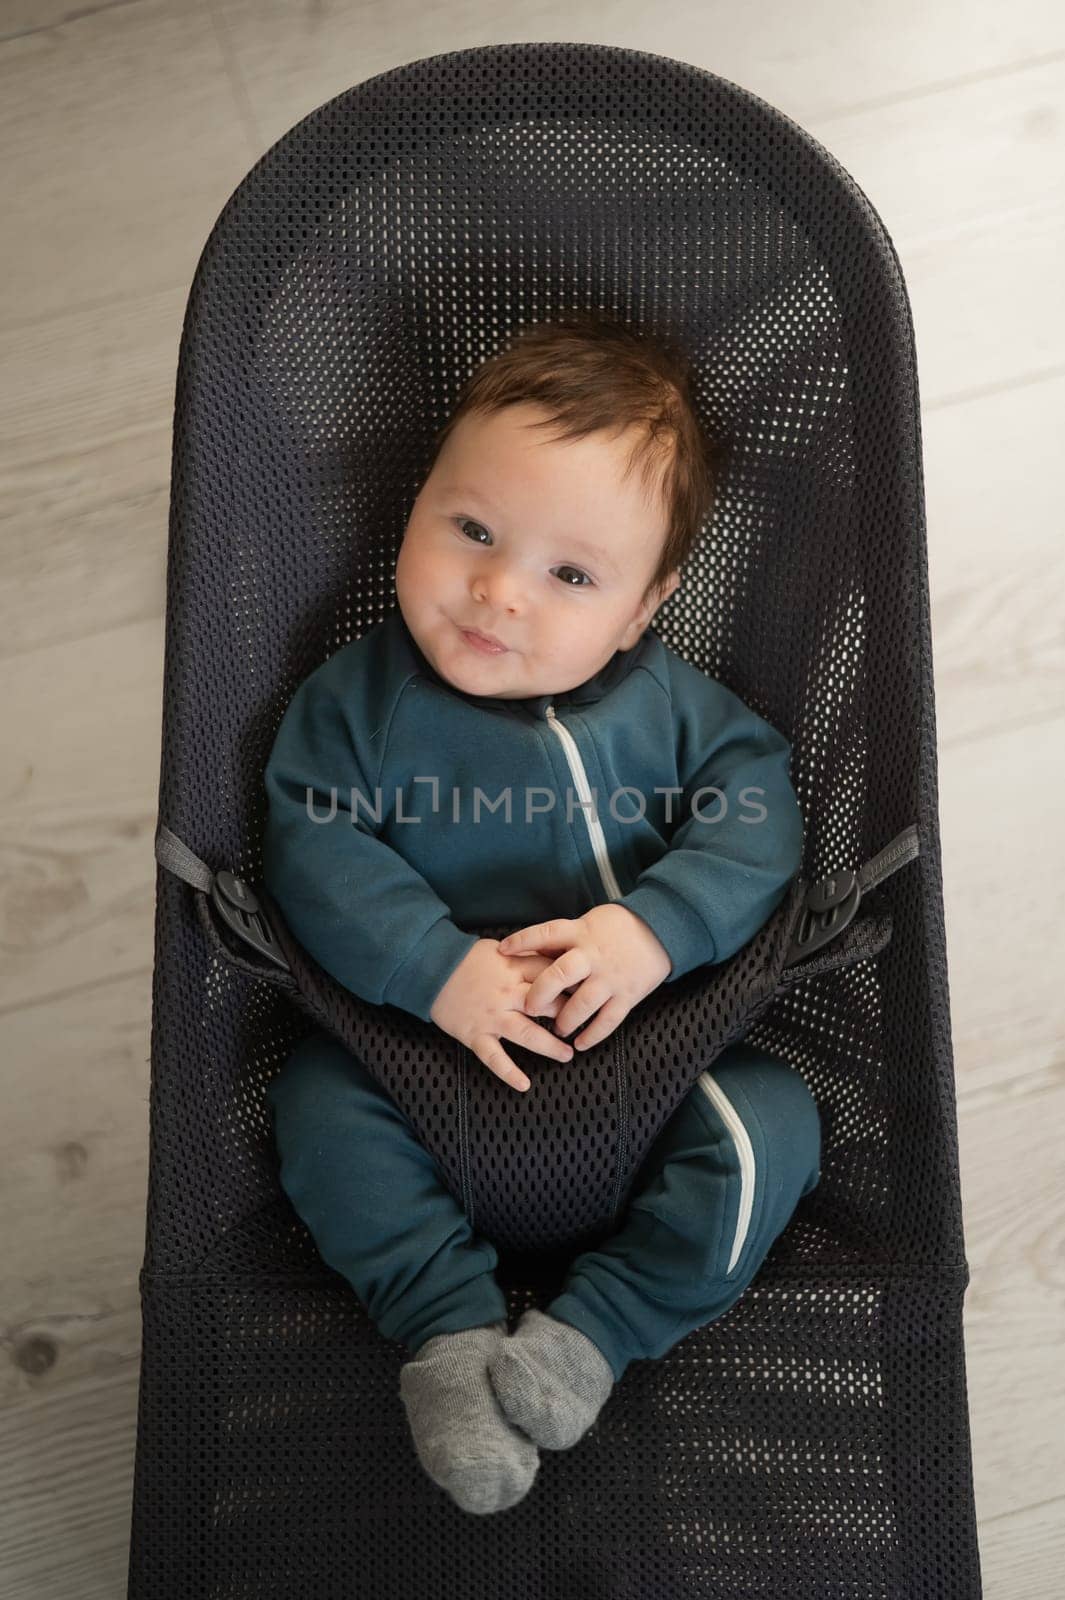 Cute newborn baby dressed in blue overalls sitting in a baby lounger. Vertical photo. by mrwed54